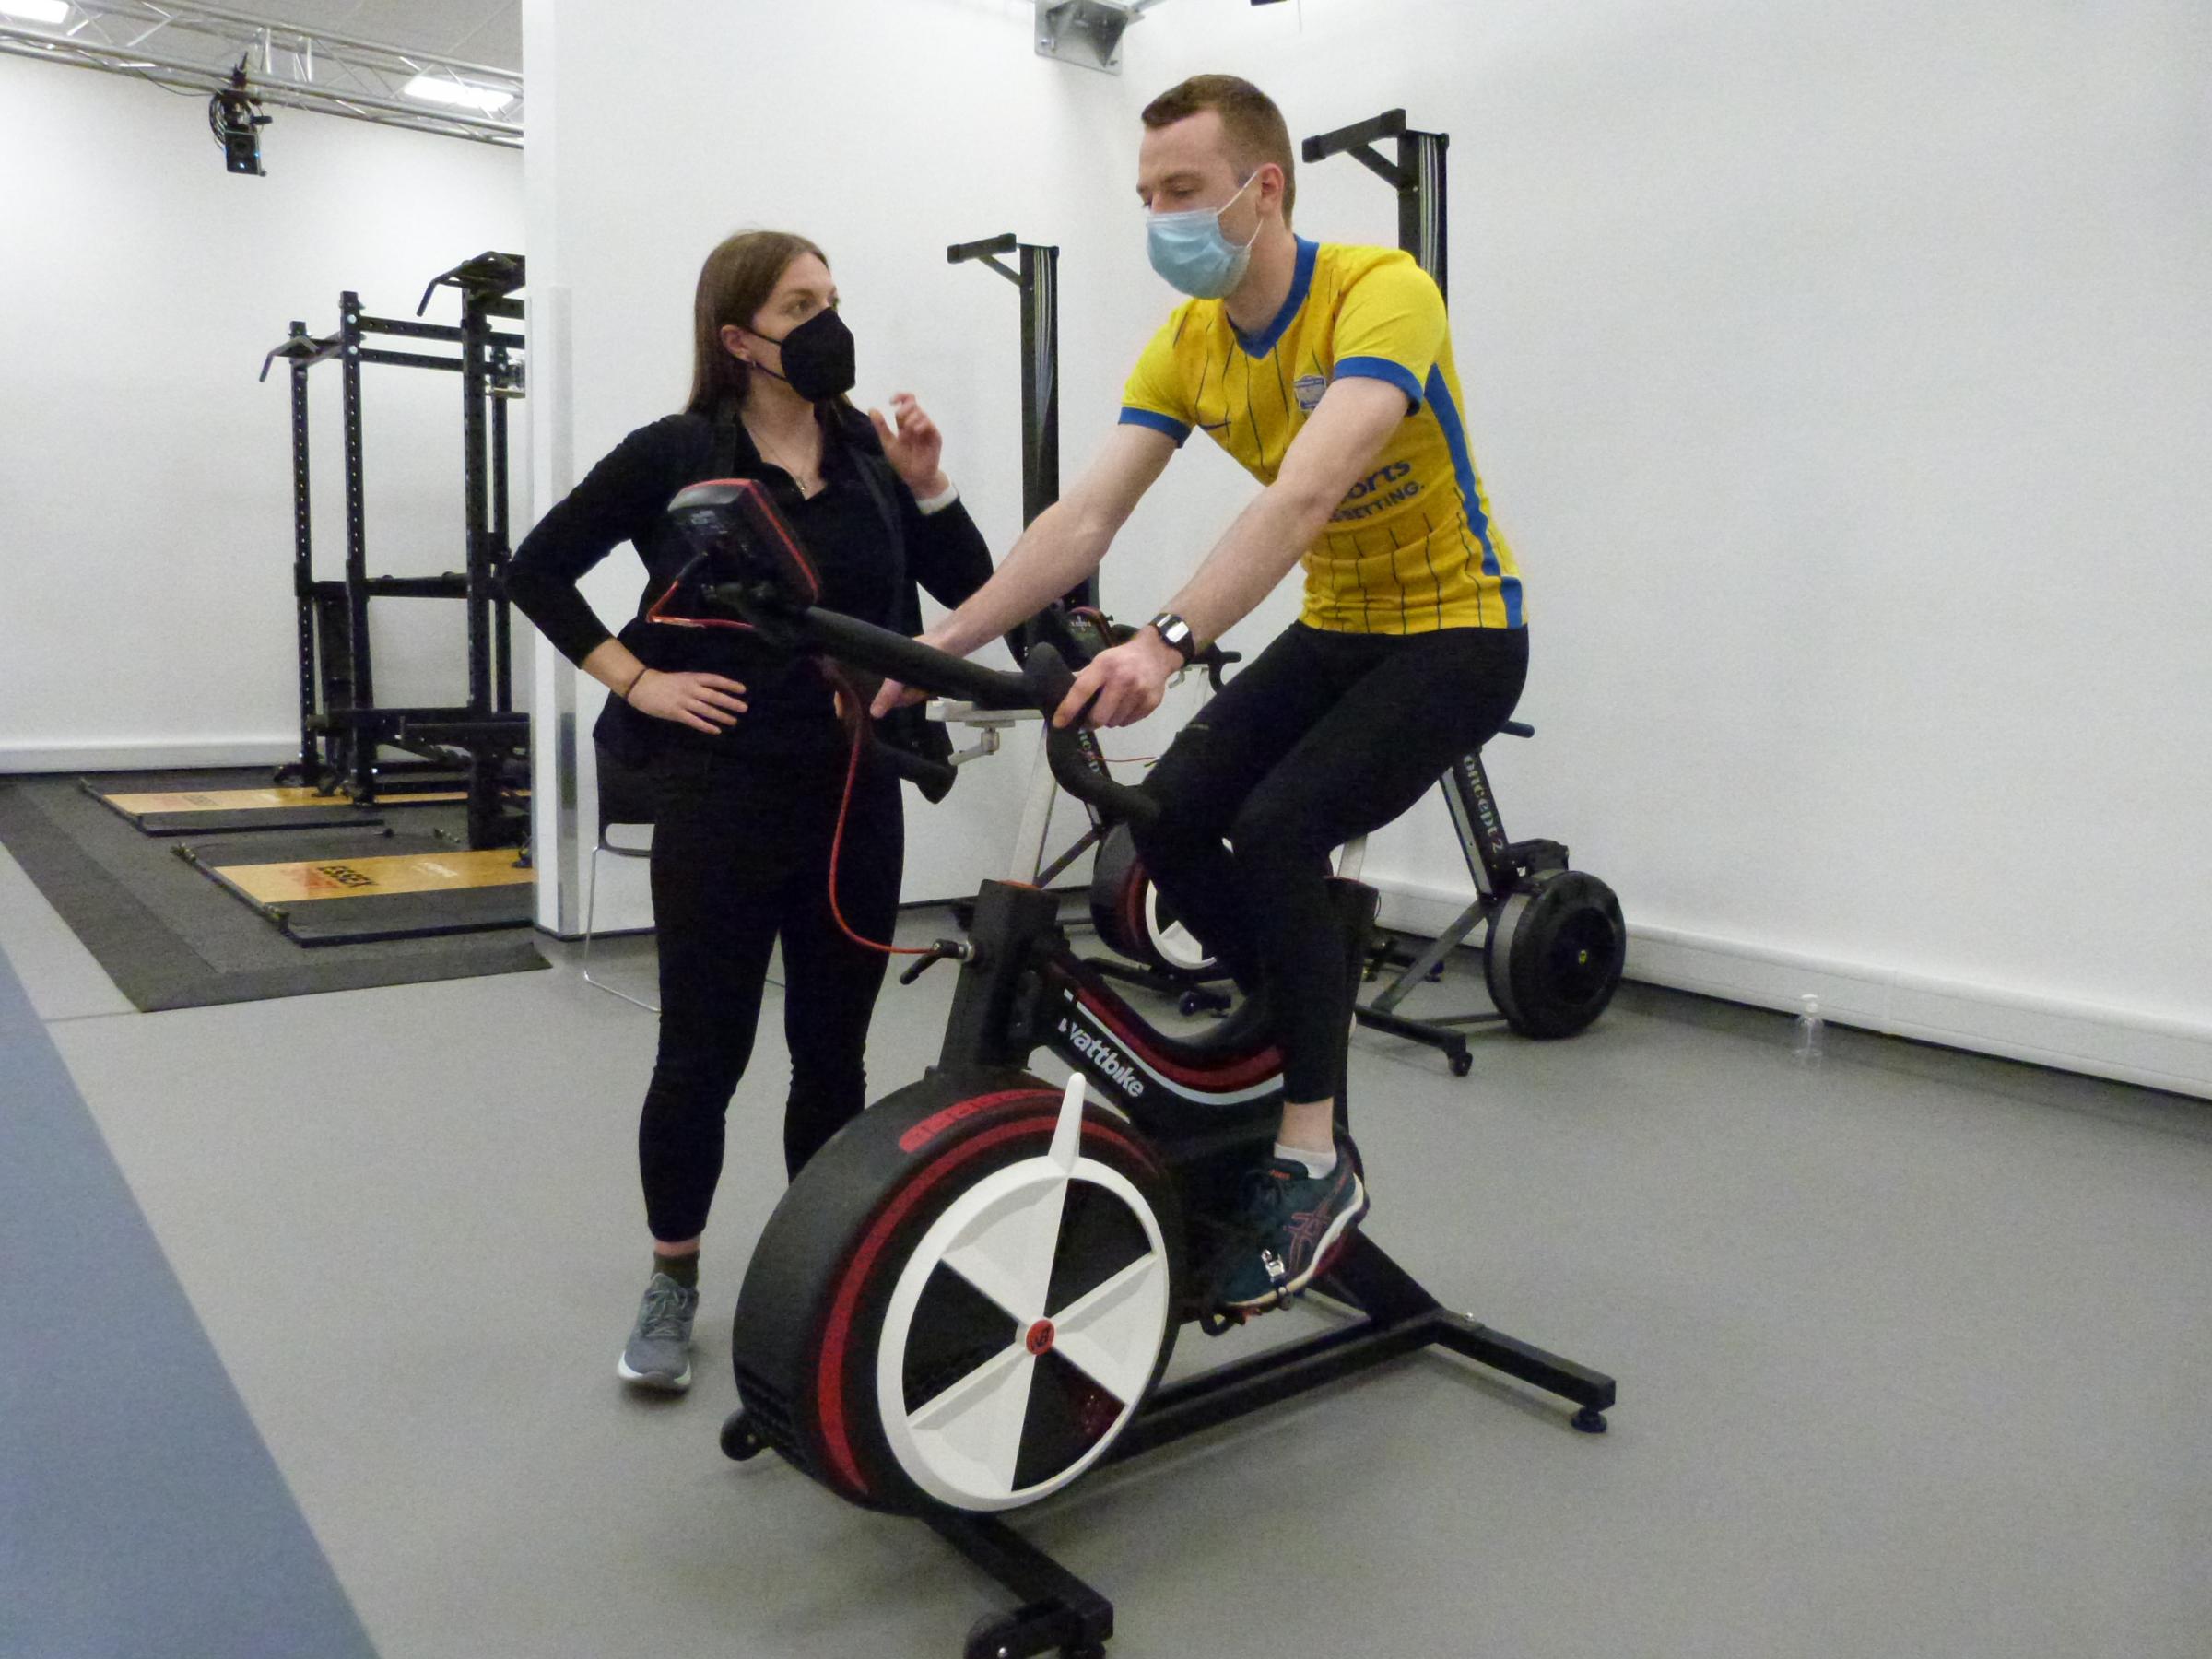 Warm-up – Kelly puts our Gazette journalist through his paces